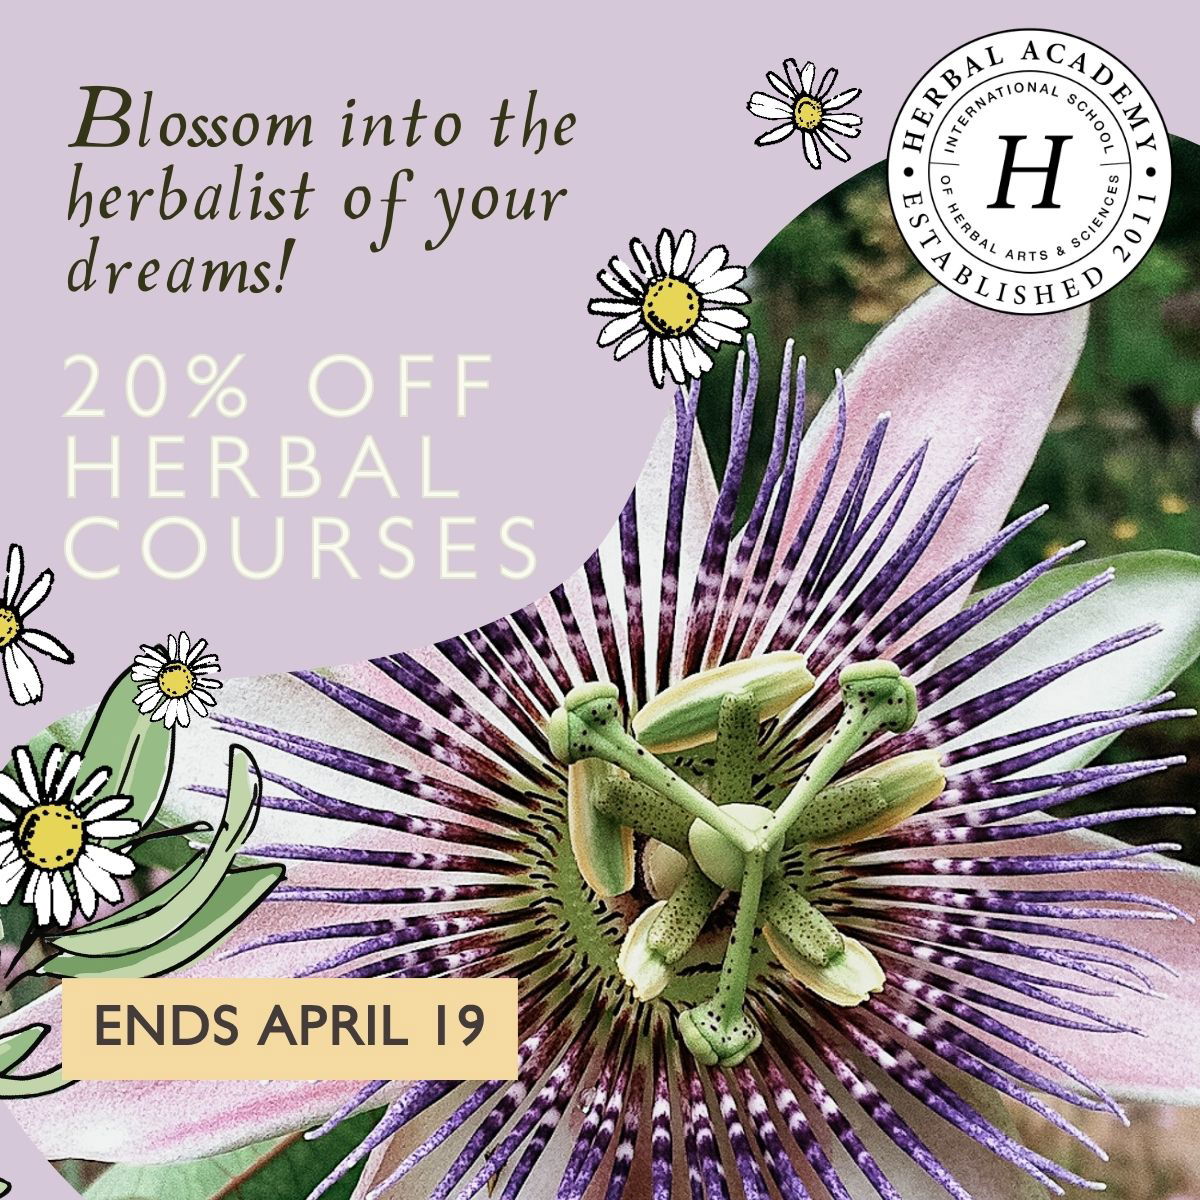 Herbal Academy is offering 20% off ALL of their courses and path packages now through April 19 (no coupon needed).